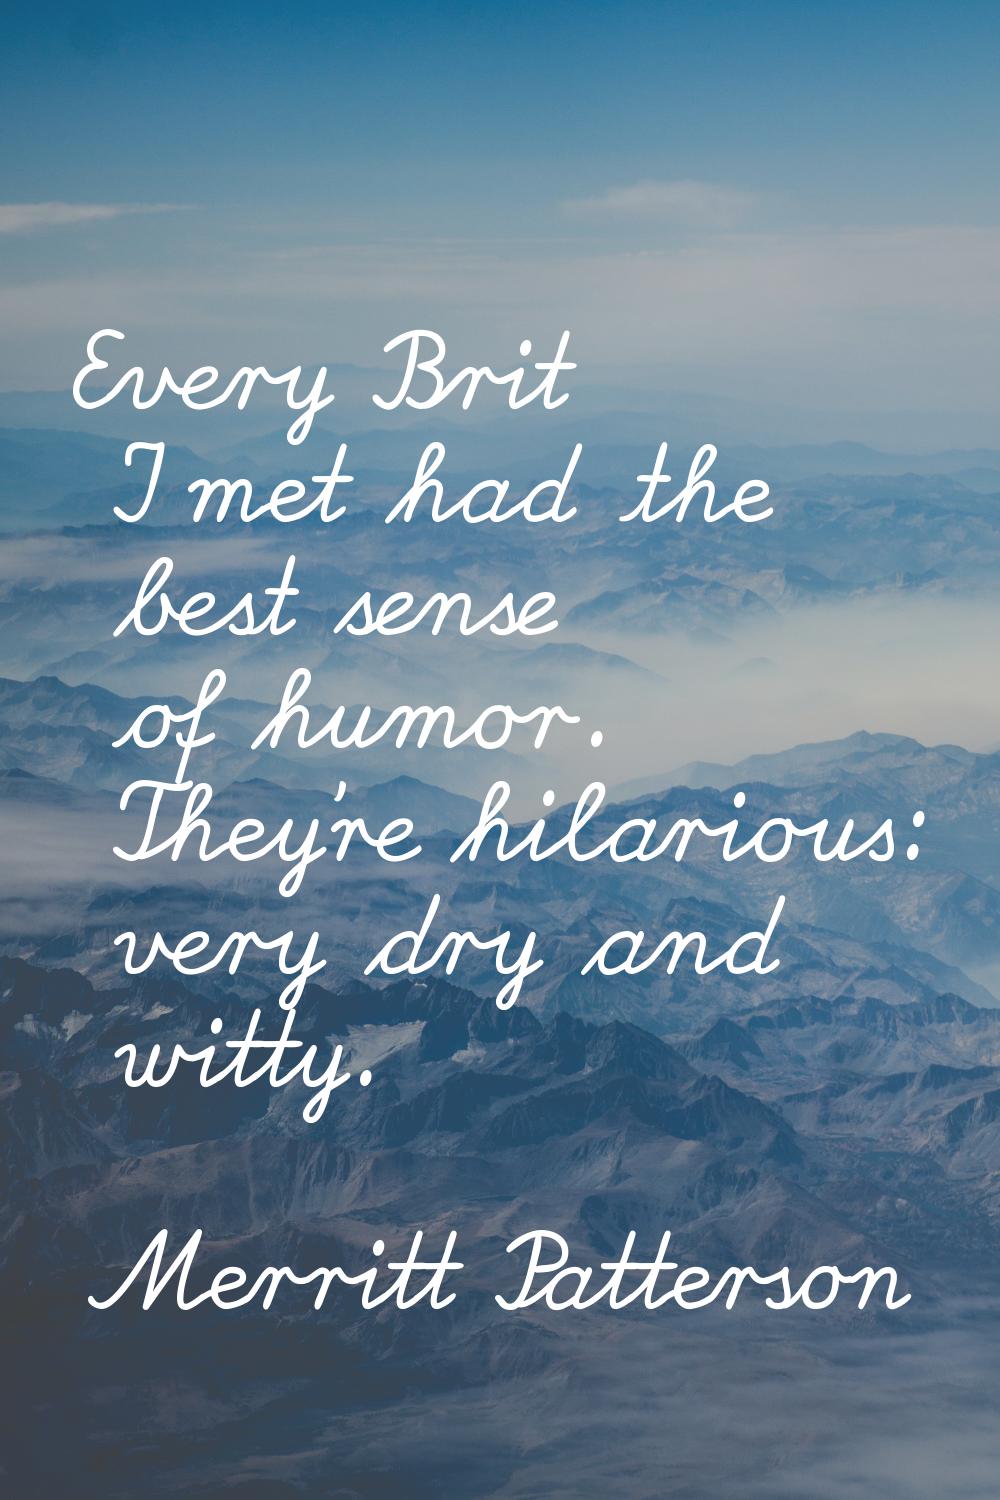 Every Brit I met had the best sense of humor. They're hilarious: very dry and witty.